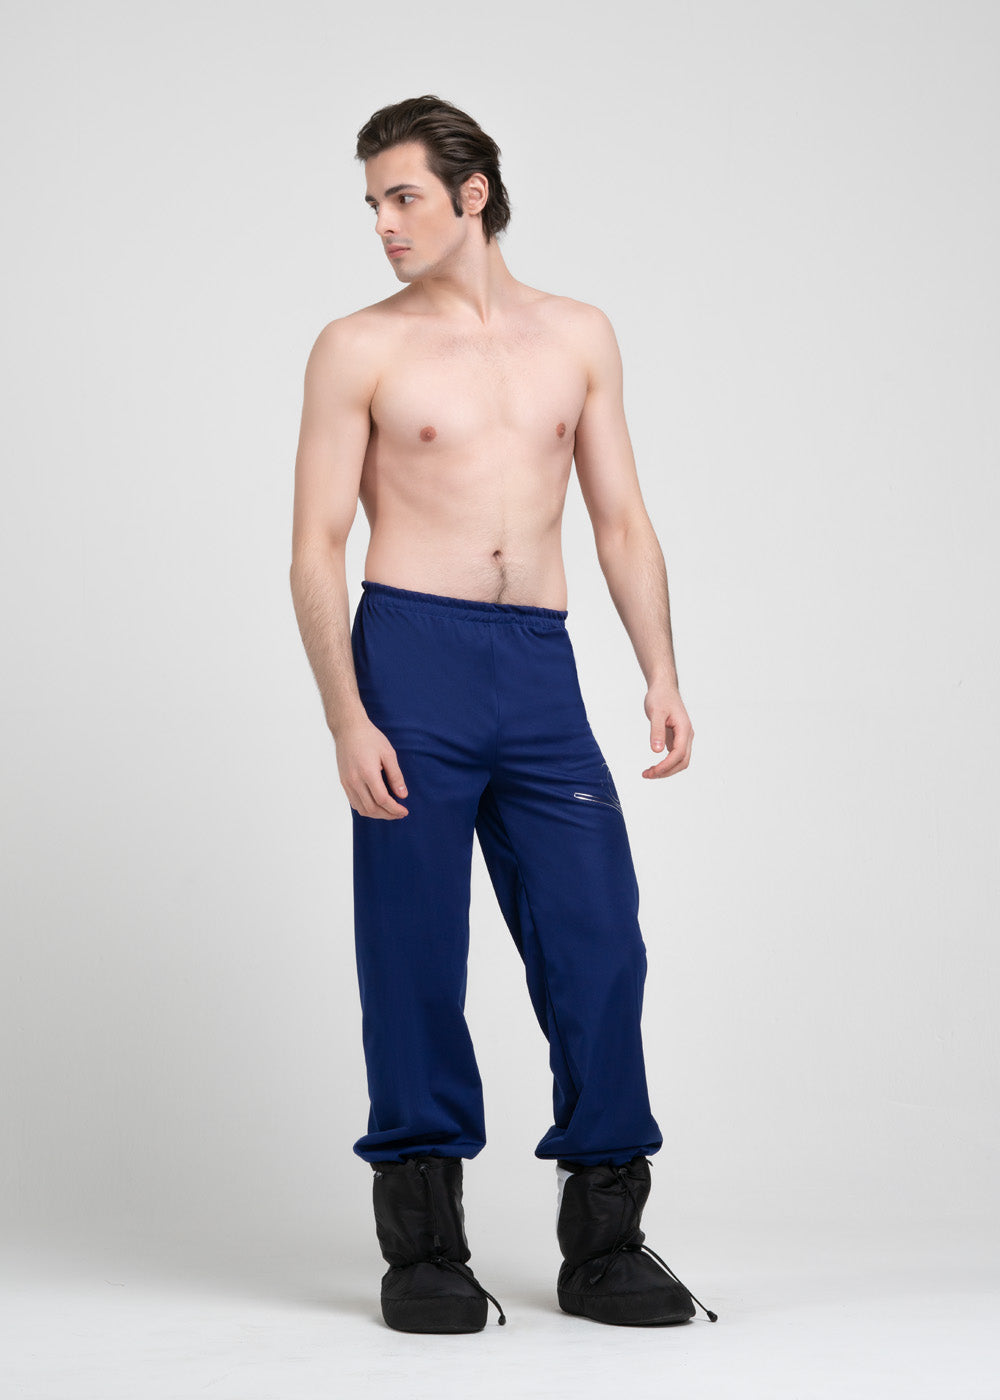 Warm Up Pants - The Stage Shop